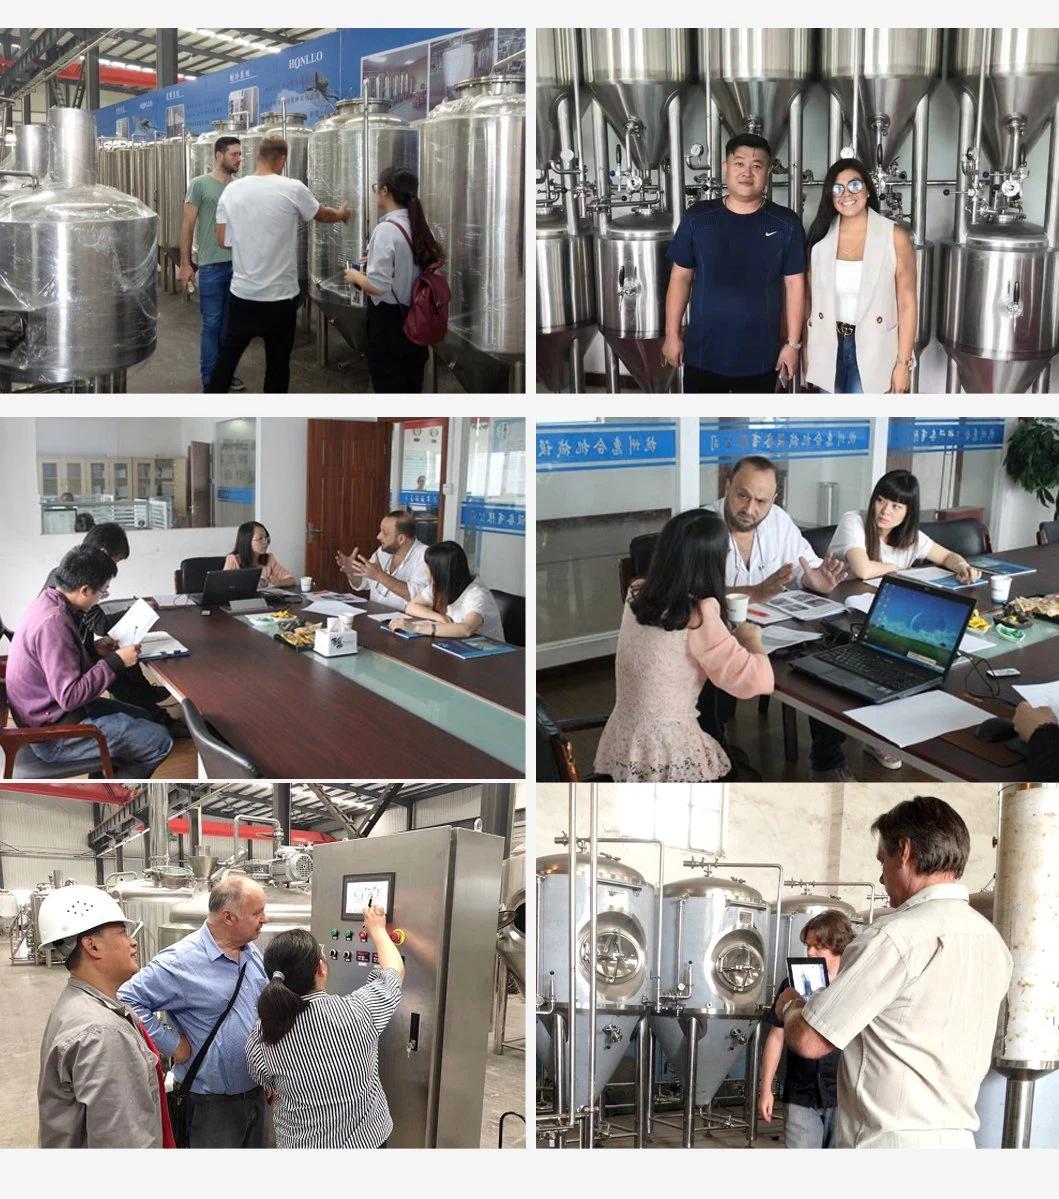 500L Touch Screen Automatic/Digital Display Semi-Auto Controlling Bright Beer Storage Tank ISO UL CE